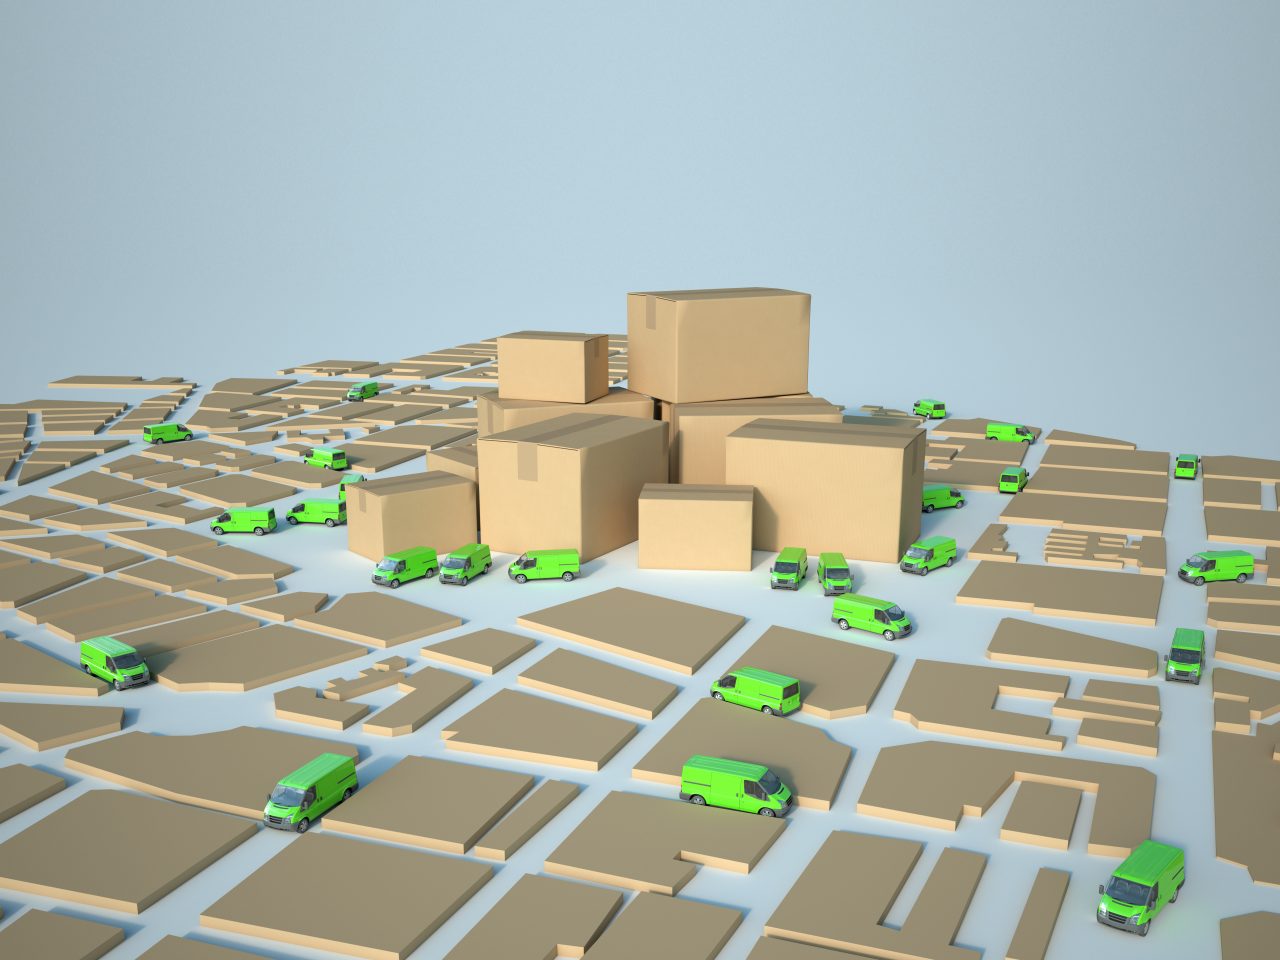 3D rendering of a cardboard textured map with green trucks circulating and a pile of cartons